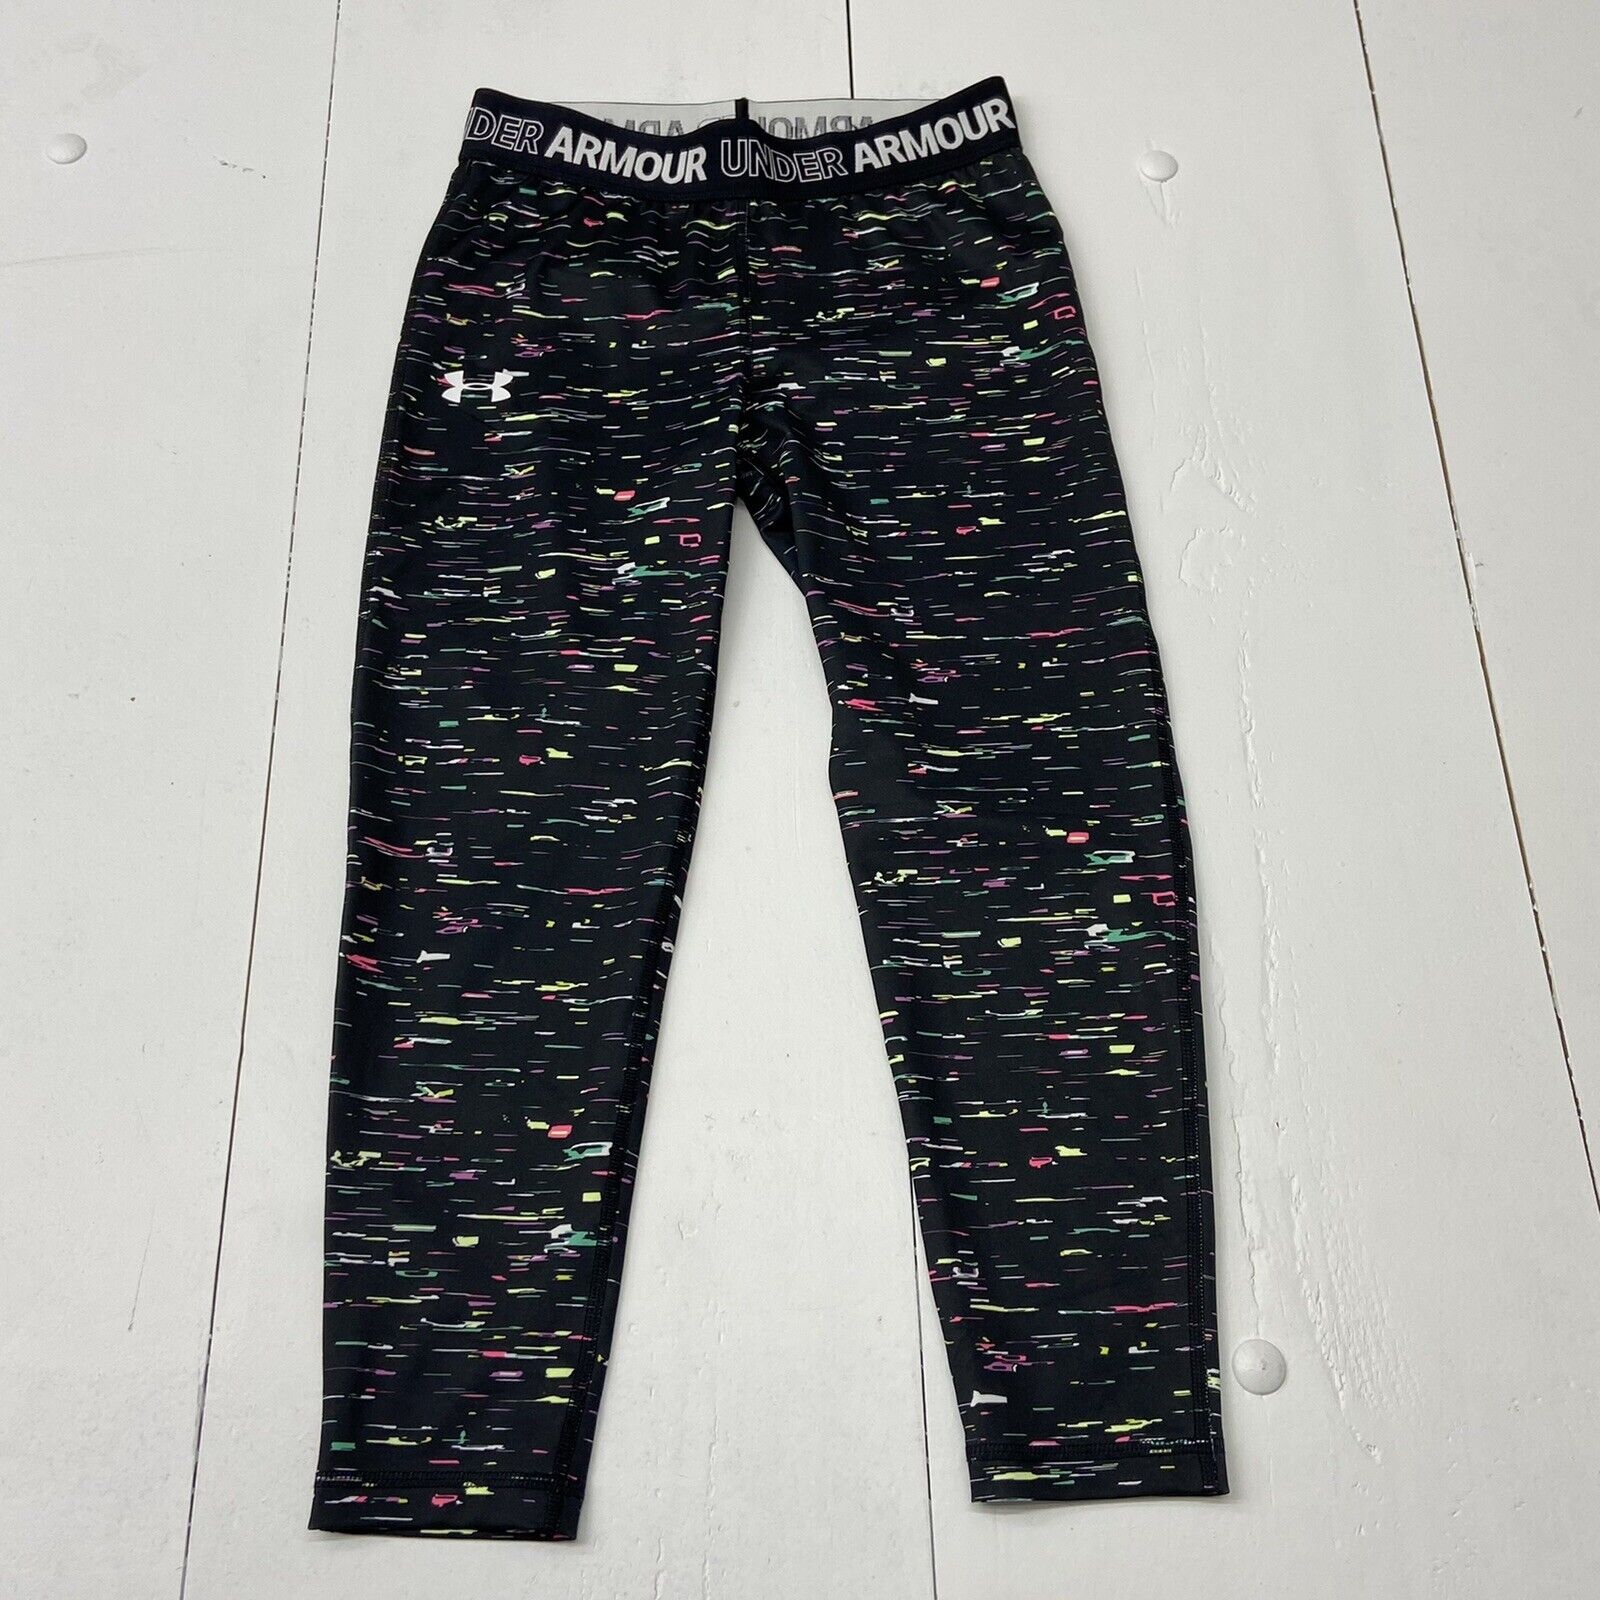 Under Armour Womens Black athletic leggings size small